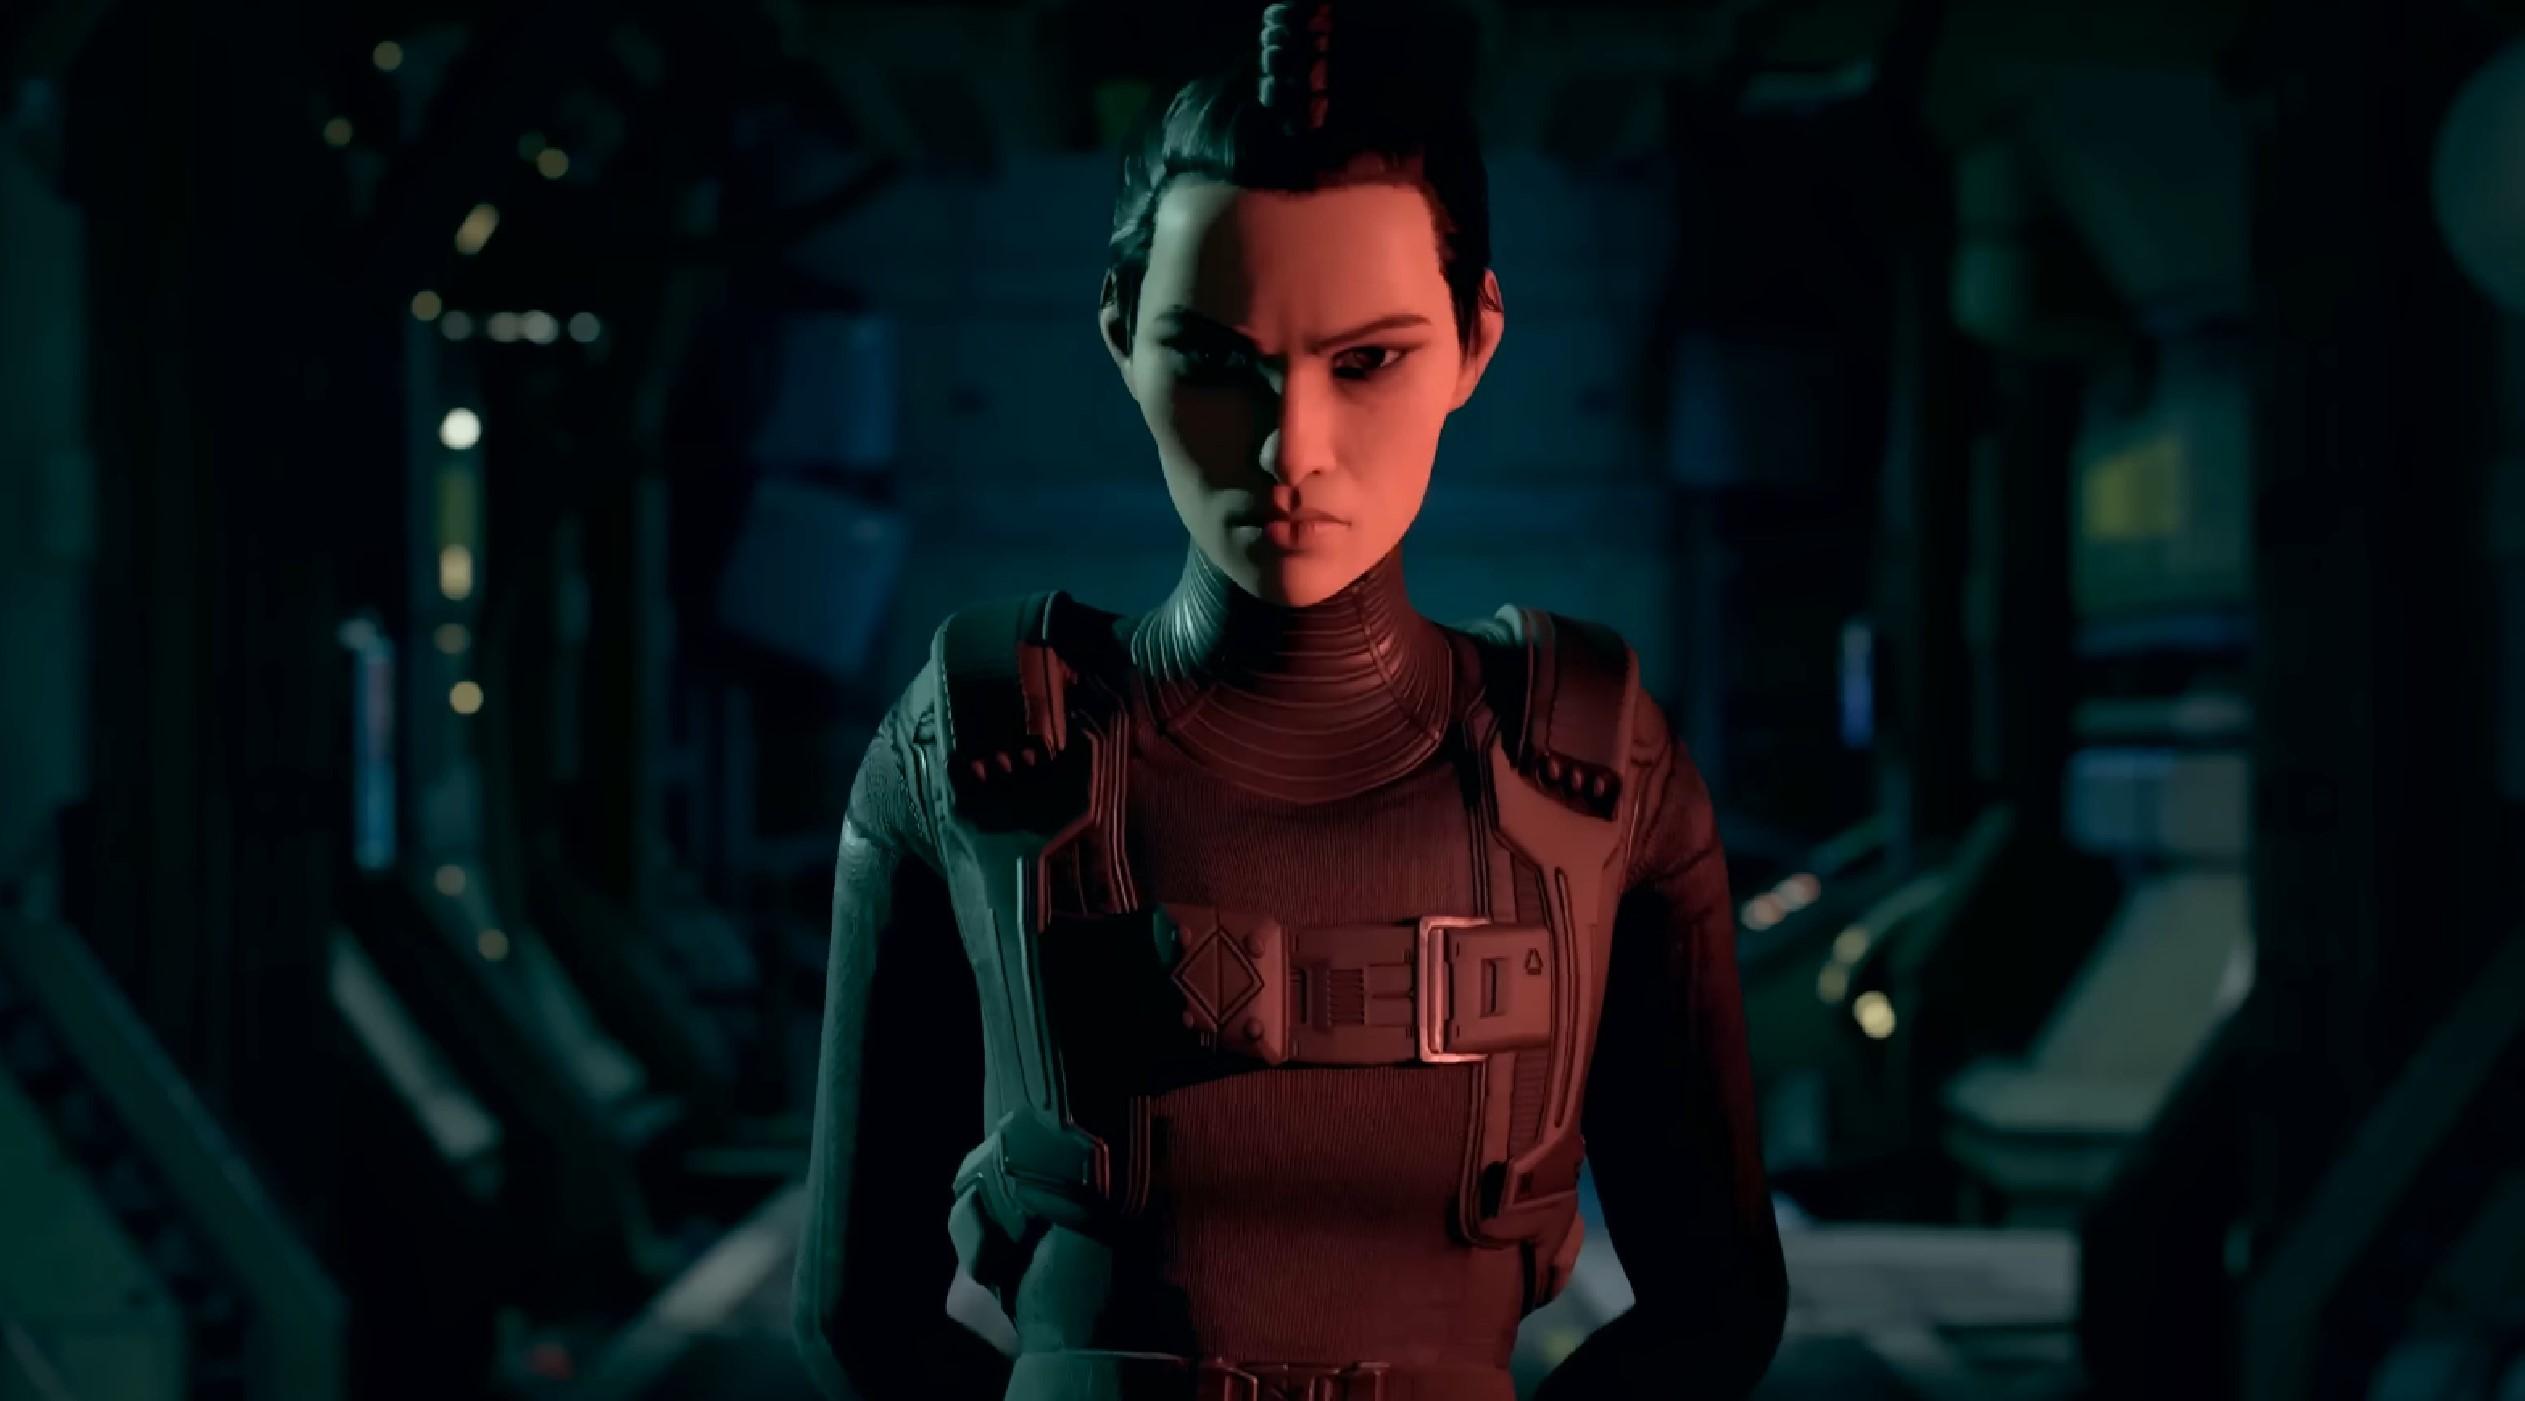 The Expanse: A Telltale series gameplay